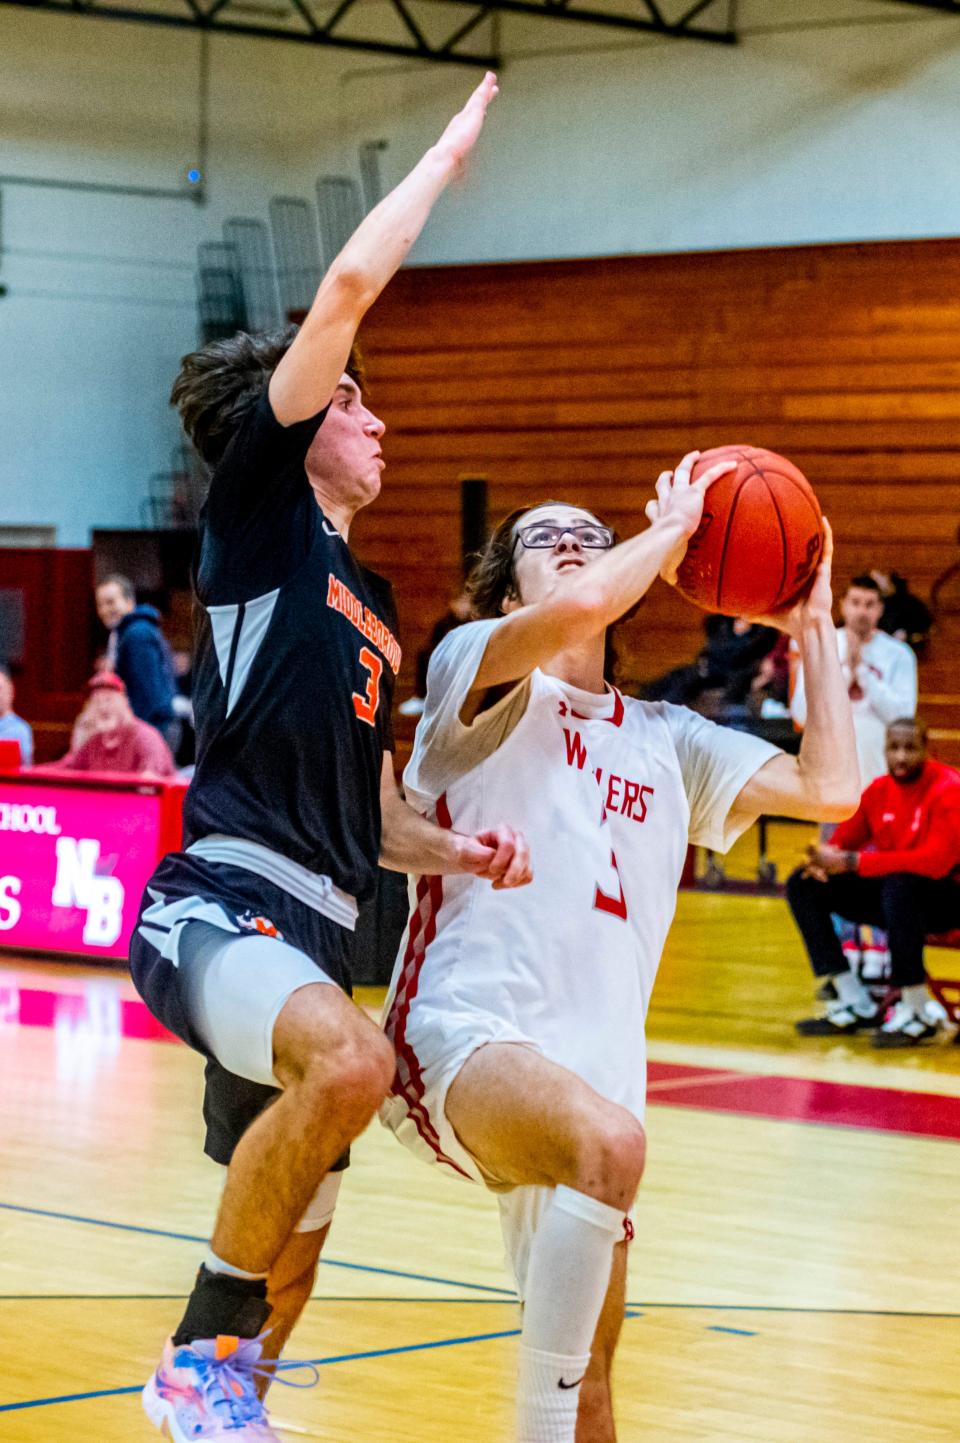 New Bedford's Craig Baptista drives to the basket.